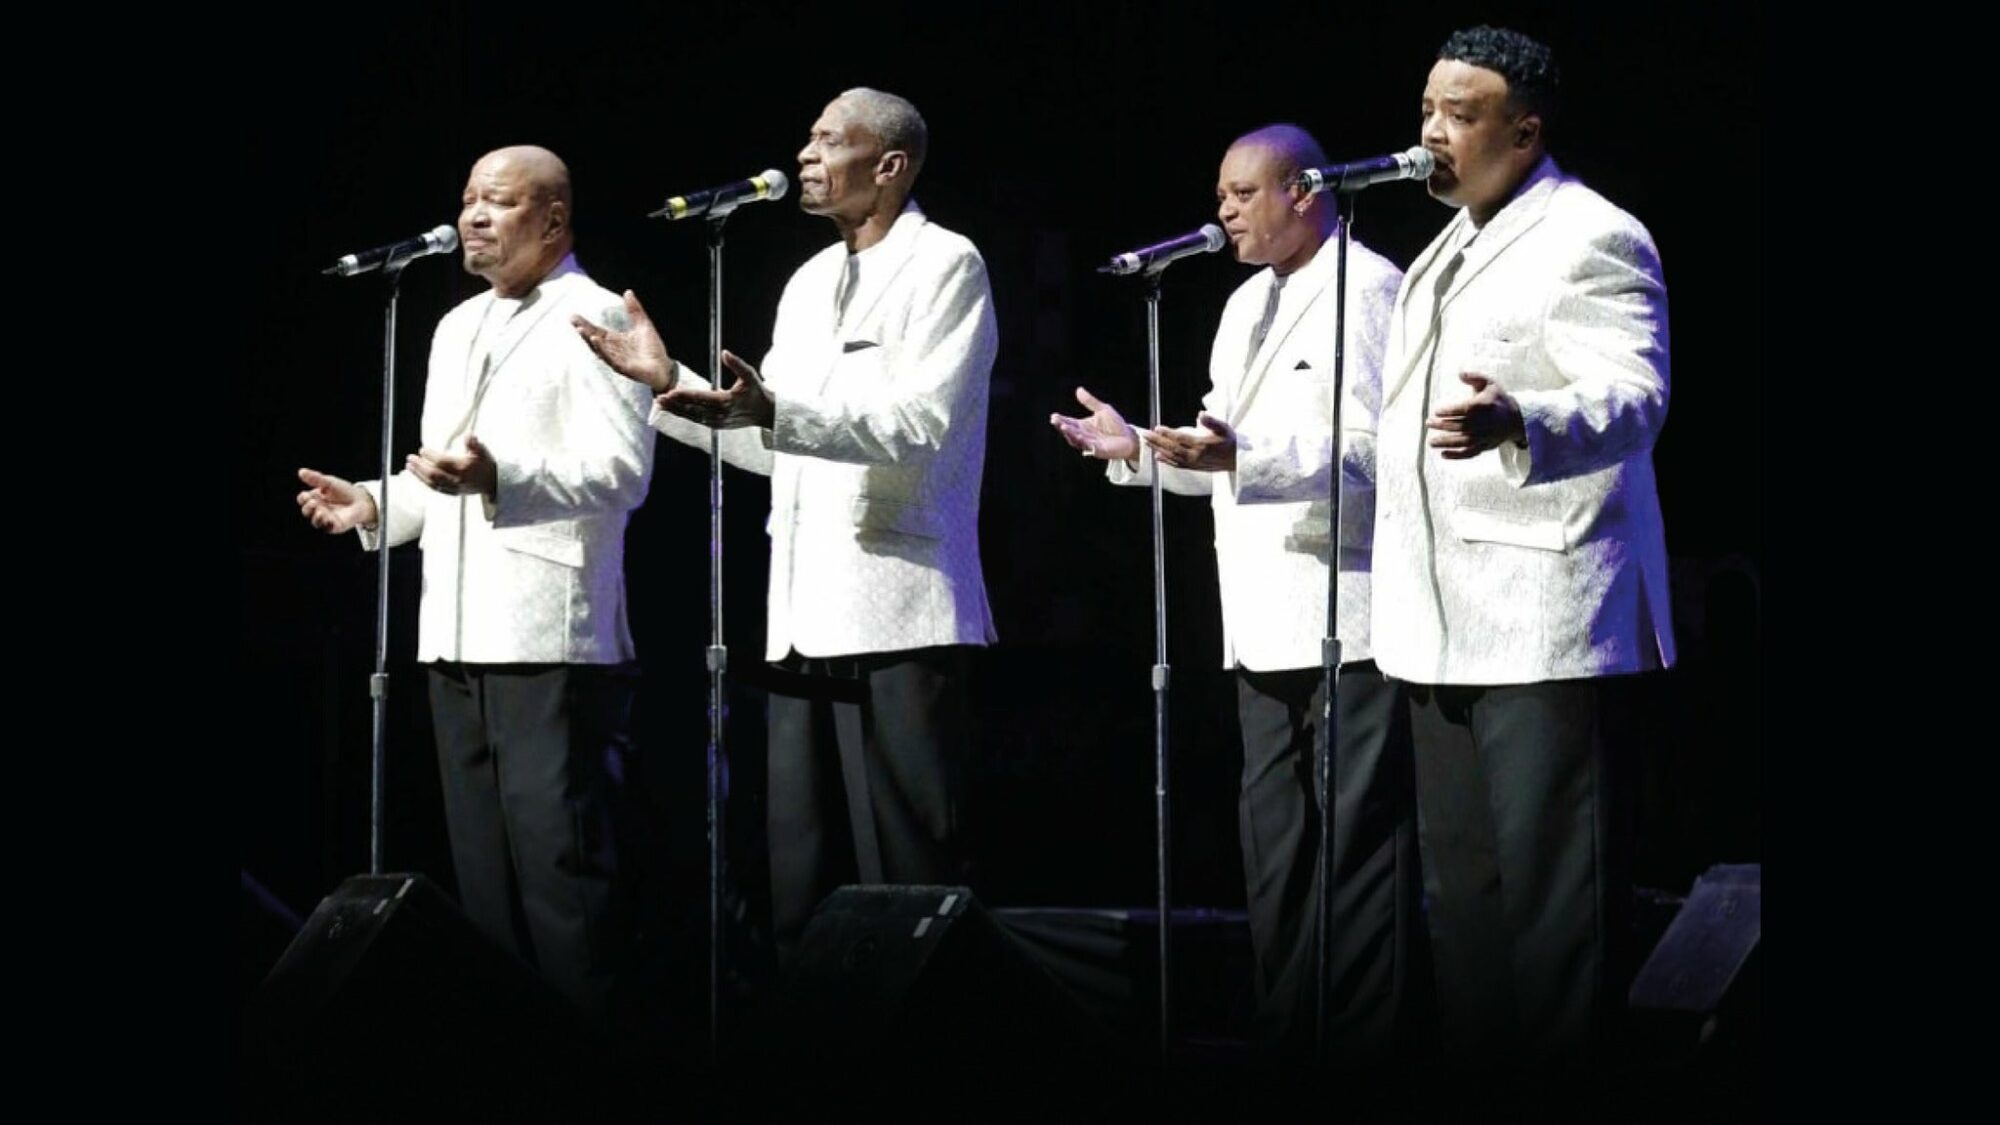 Image name The Stylistics at Sheffield City Hall Oval Hall Sheffield the 20 image from the post Events in Yorkshire.com.